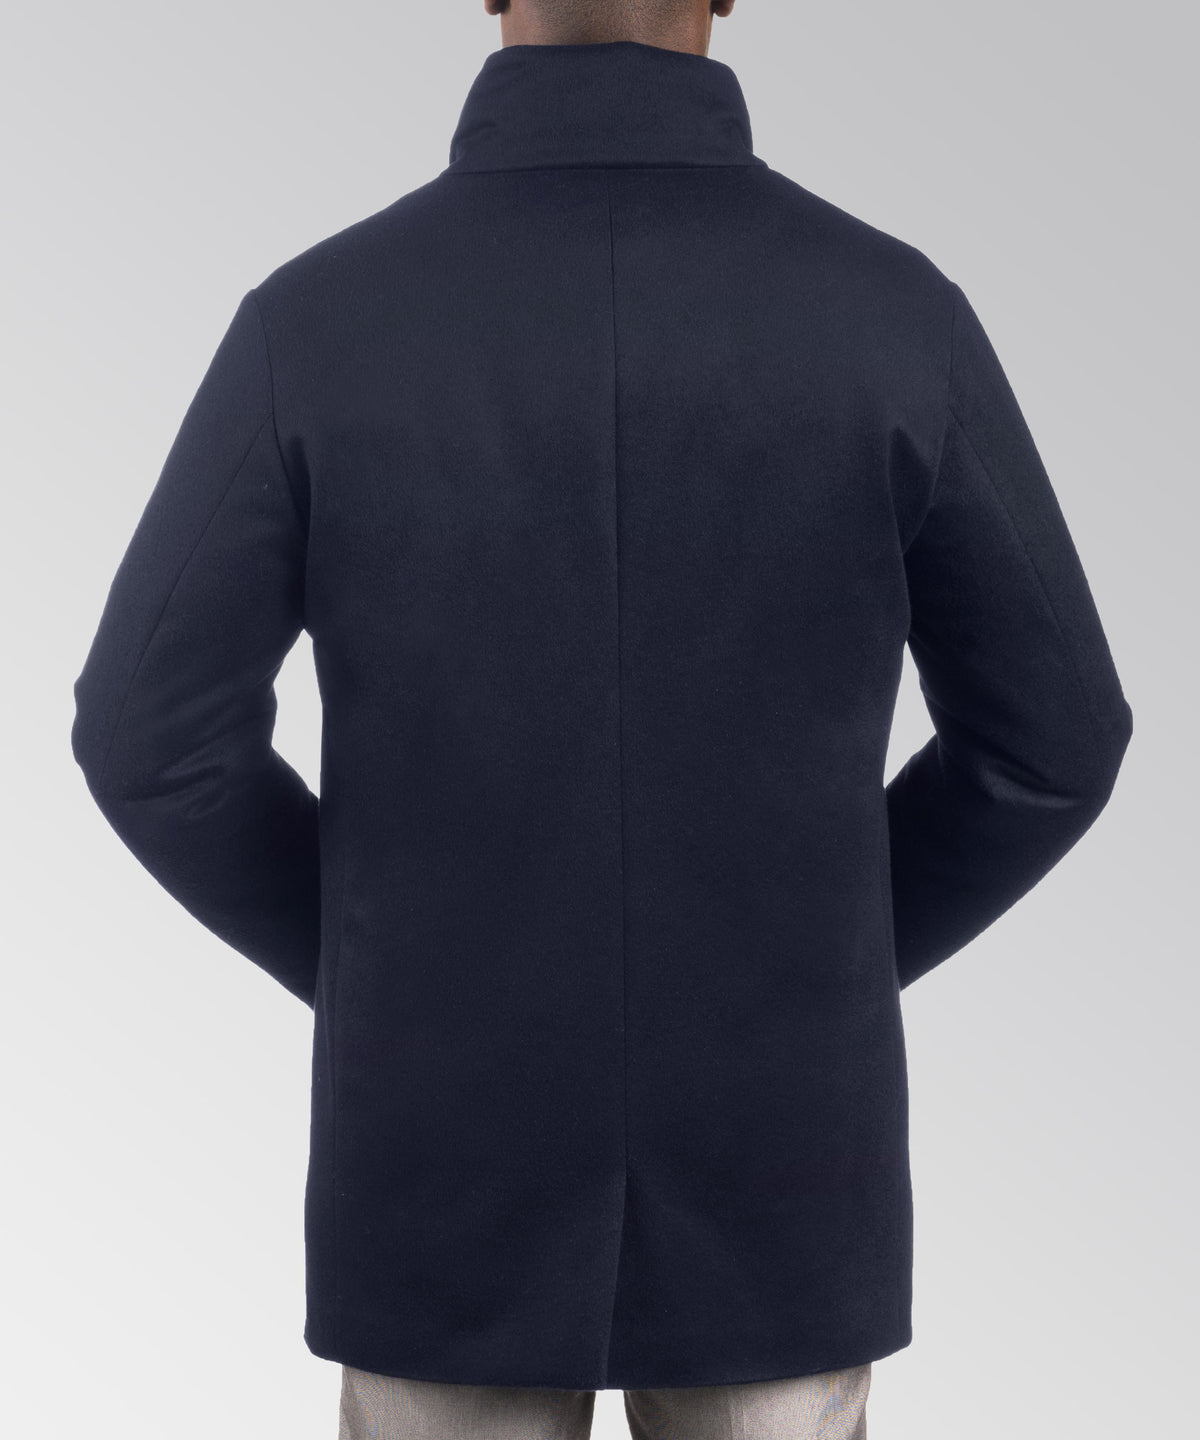 Waterproof Italian Cashmere Car Coat with Down Insulation